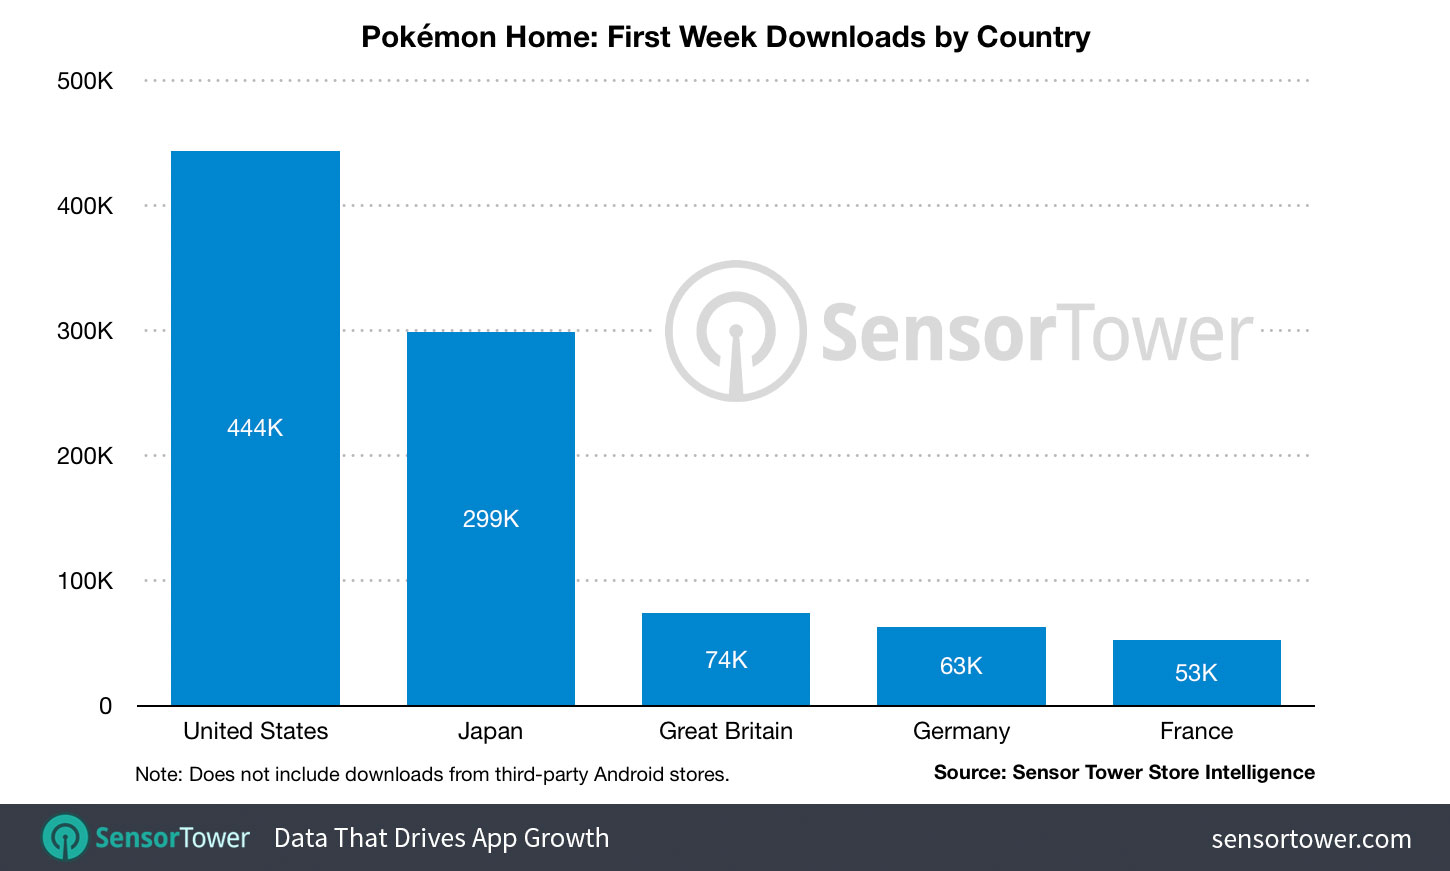 Pokémon Home: First Week Downloads by Country